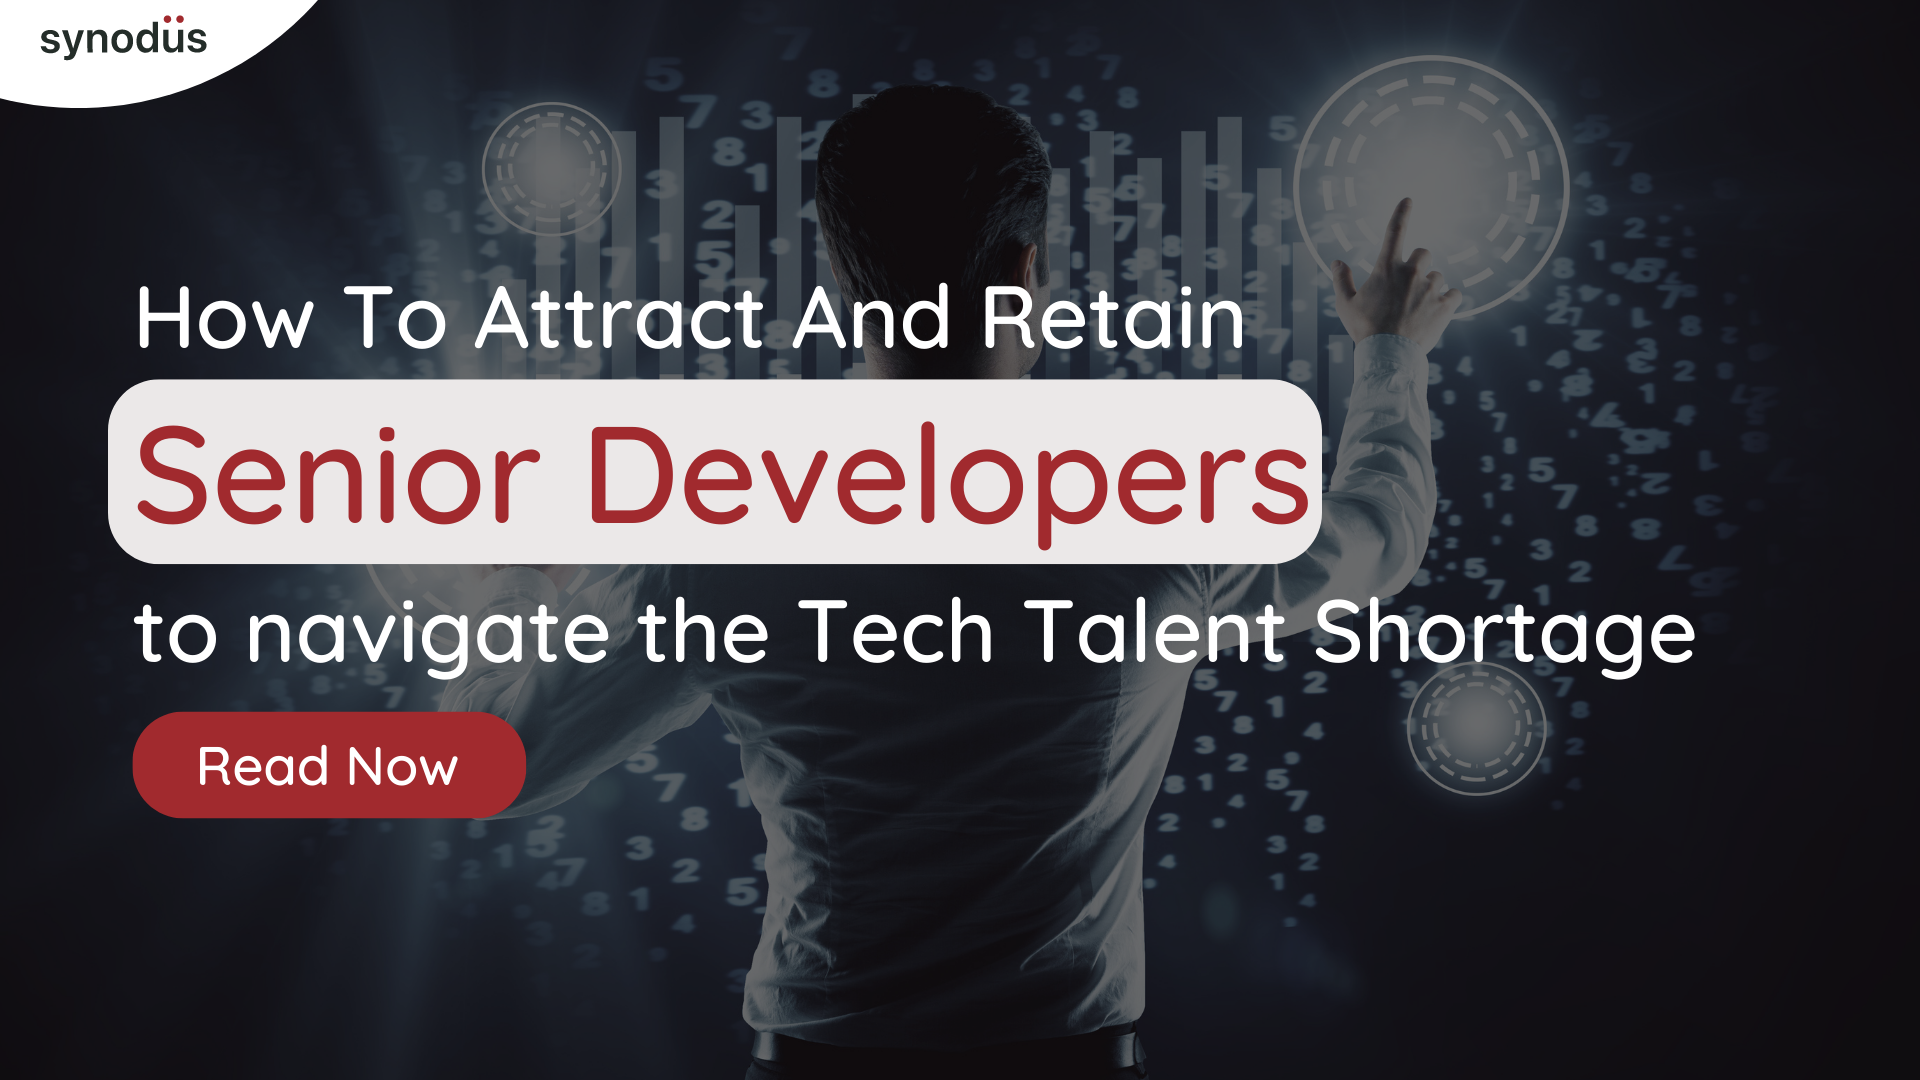 How to attract and retain senior developers to navigate Top Tech Talent Shortage